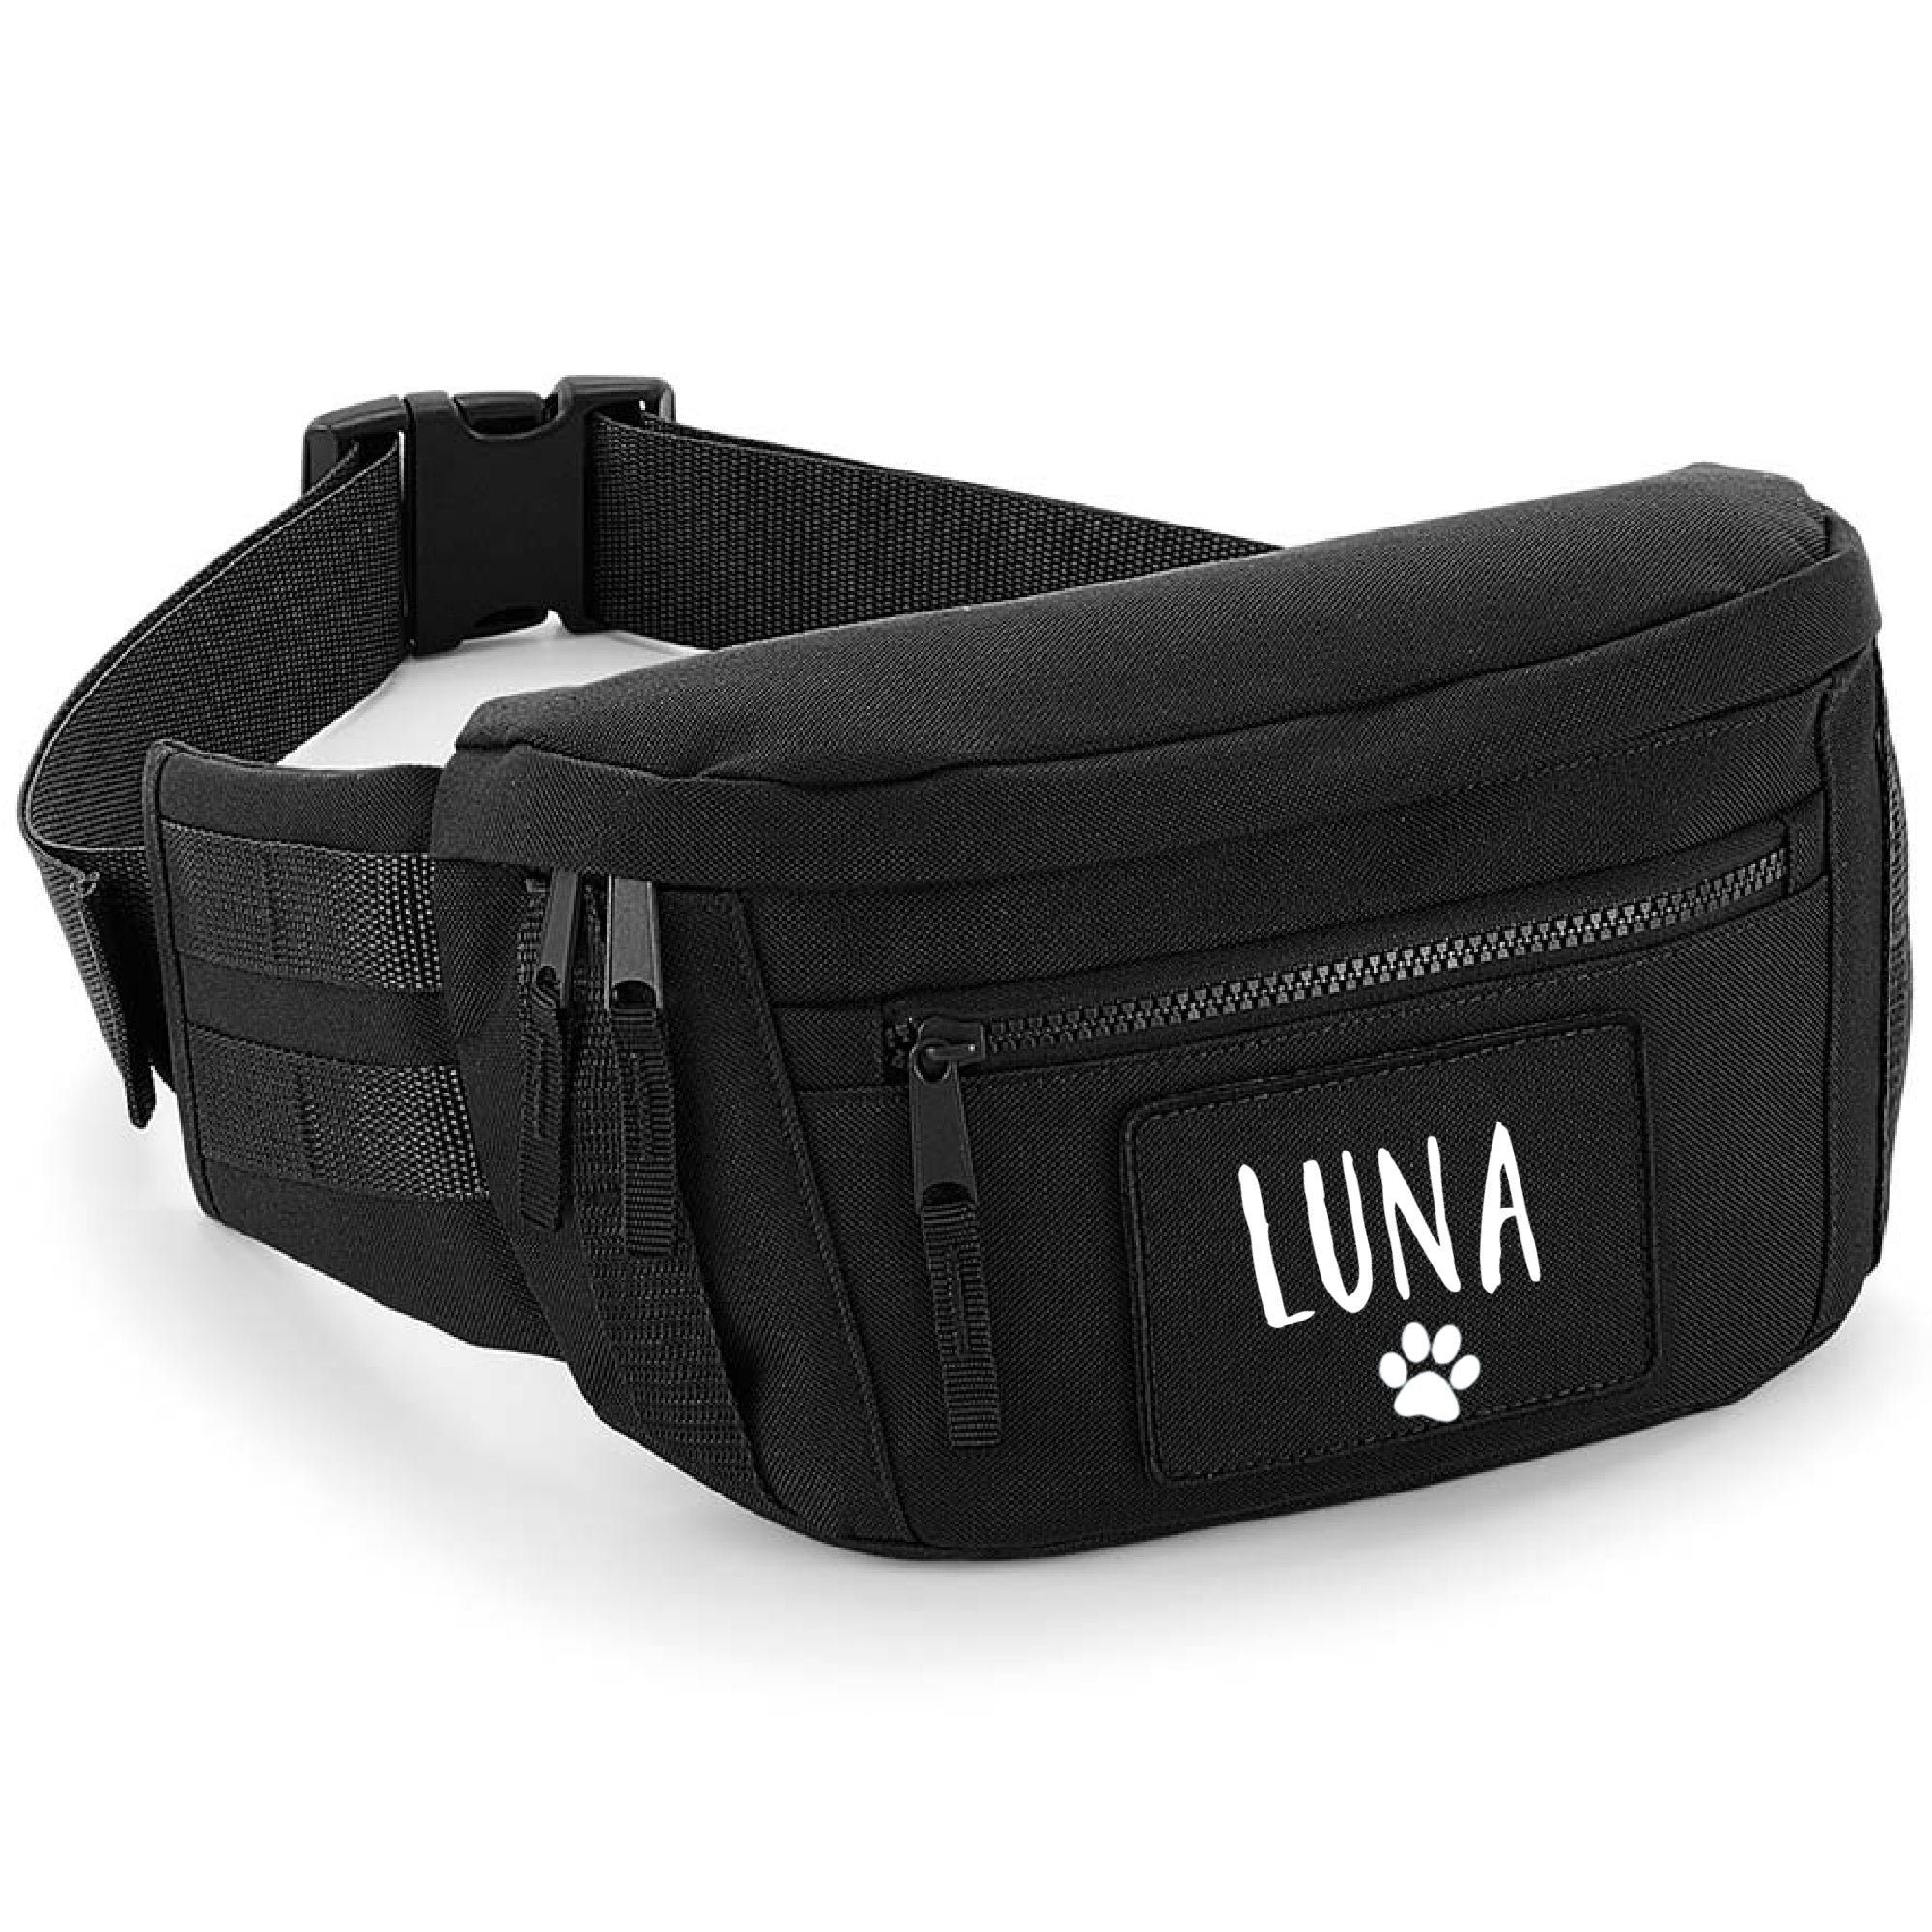 Personalised Dog Walking Bum Bag - Extra Large Belt Bag - Personalise with your dogs name